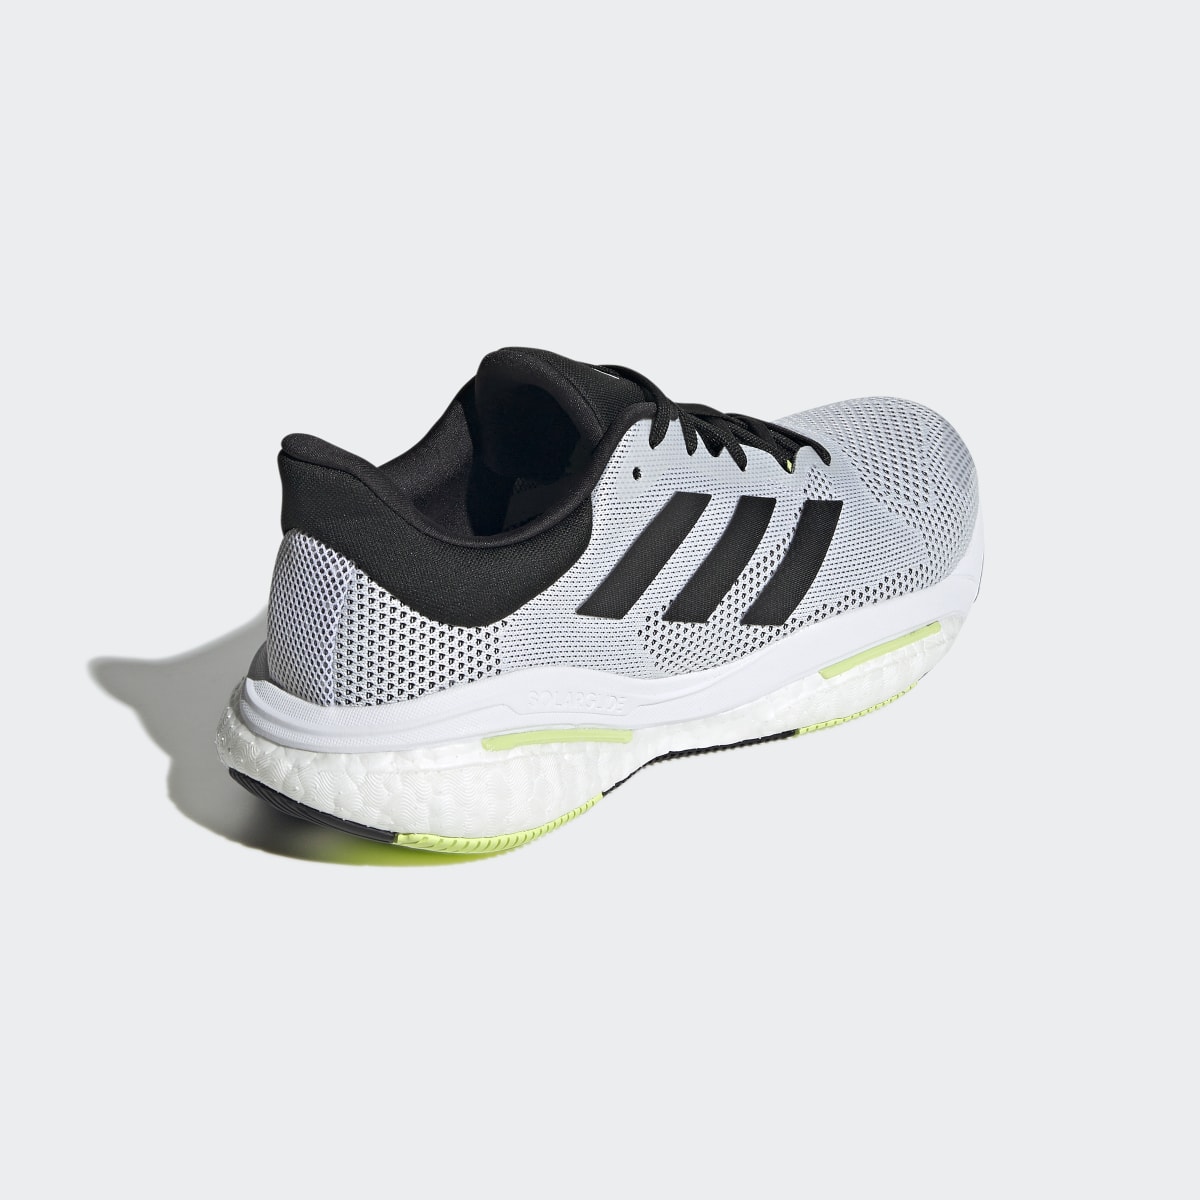 Adidas Solarglide 5 Shoes. 6